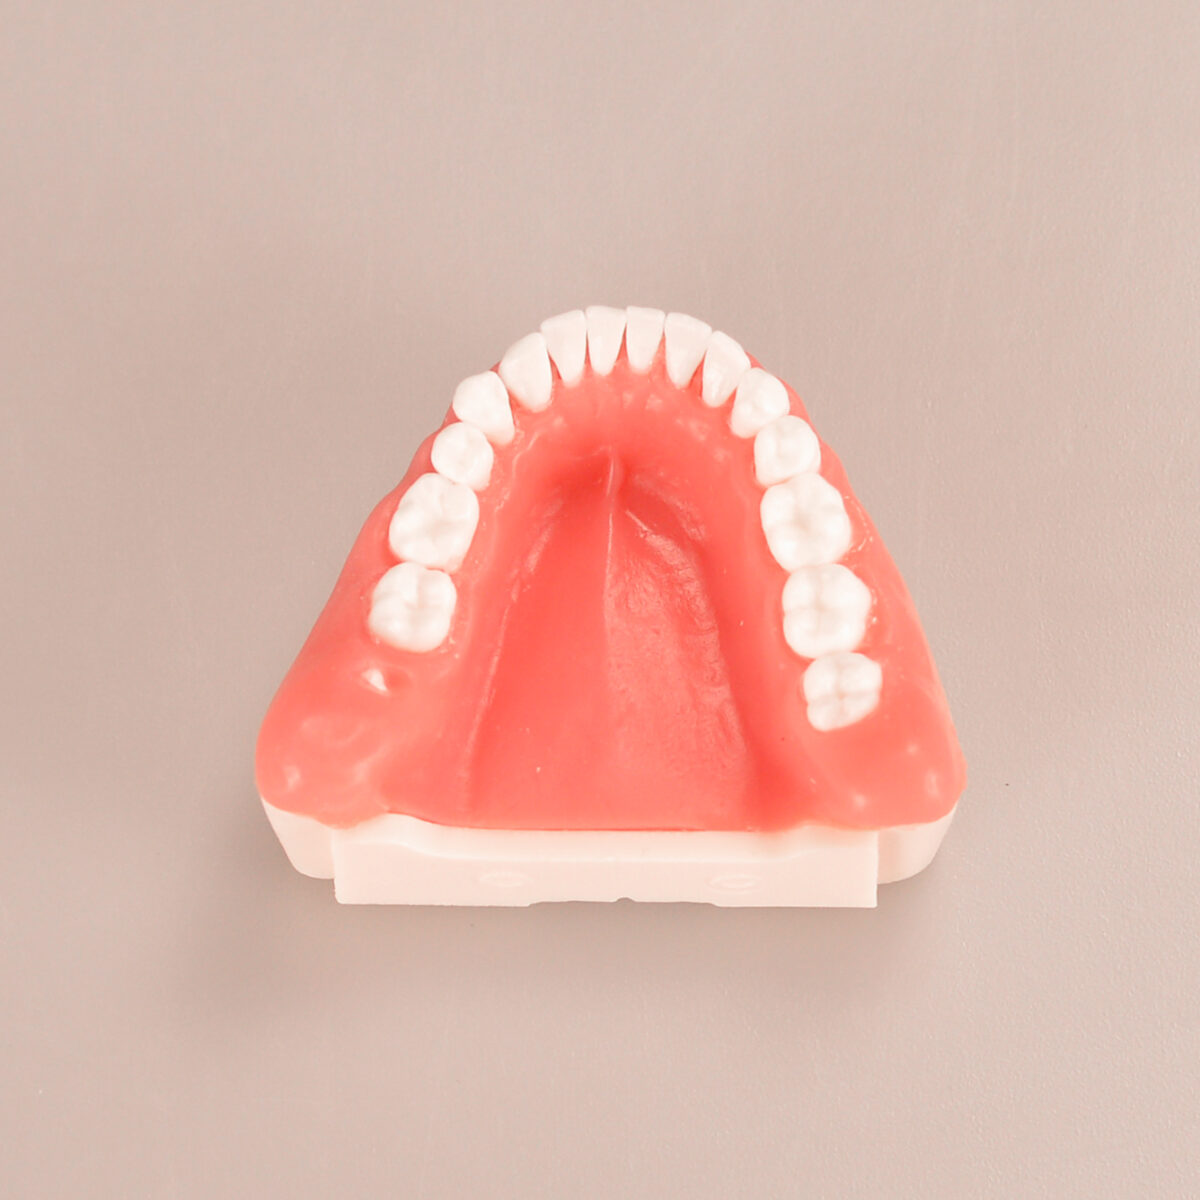 Extraction Models with wisdom tooth